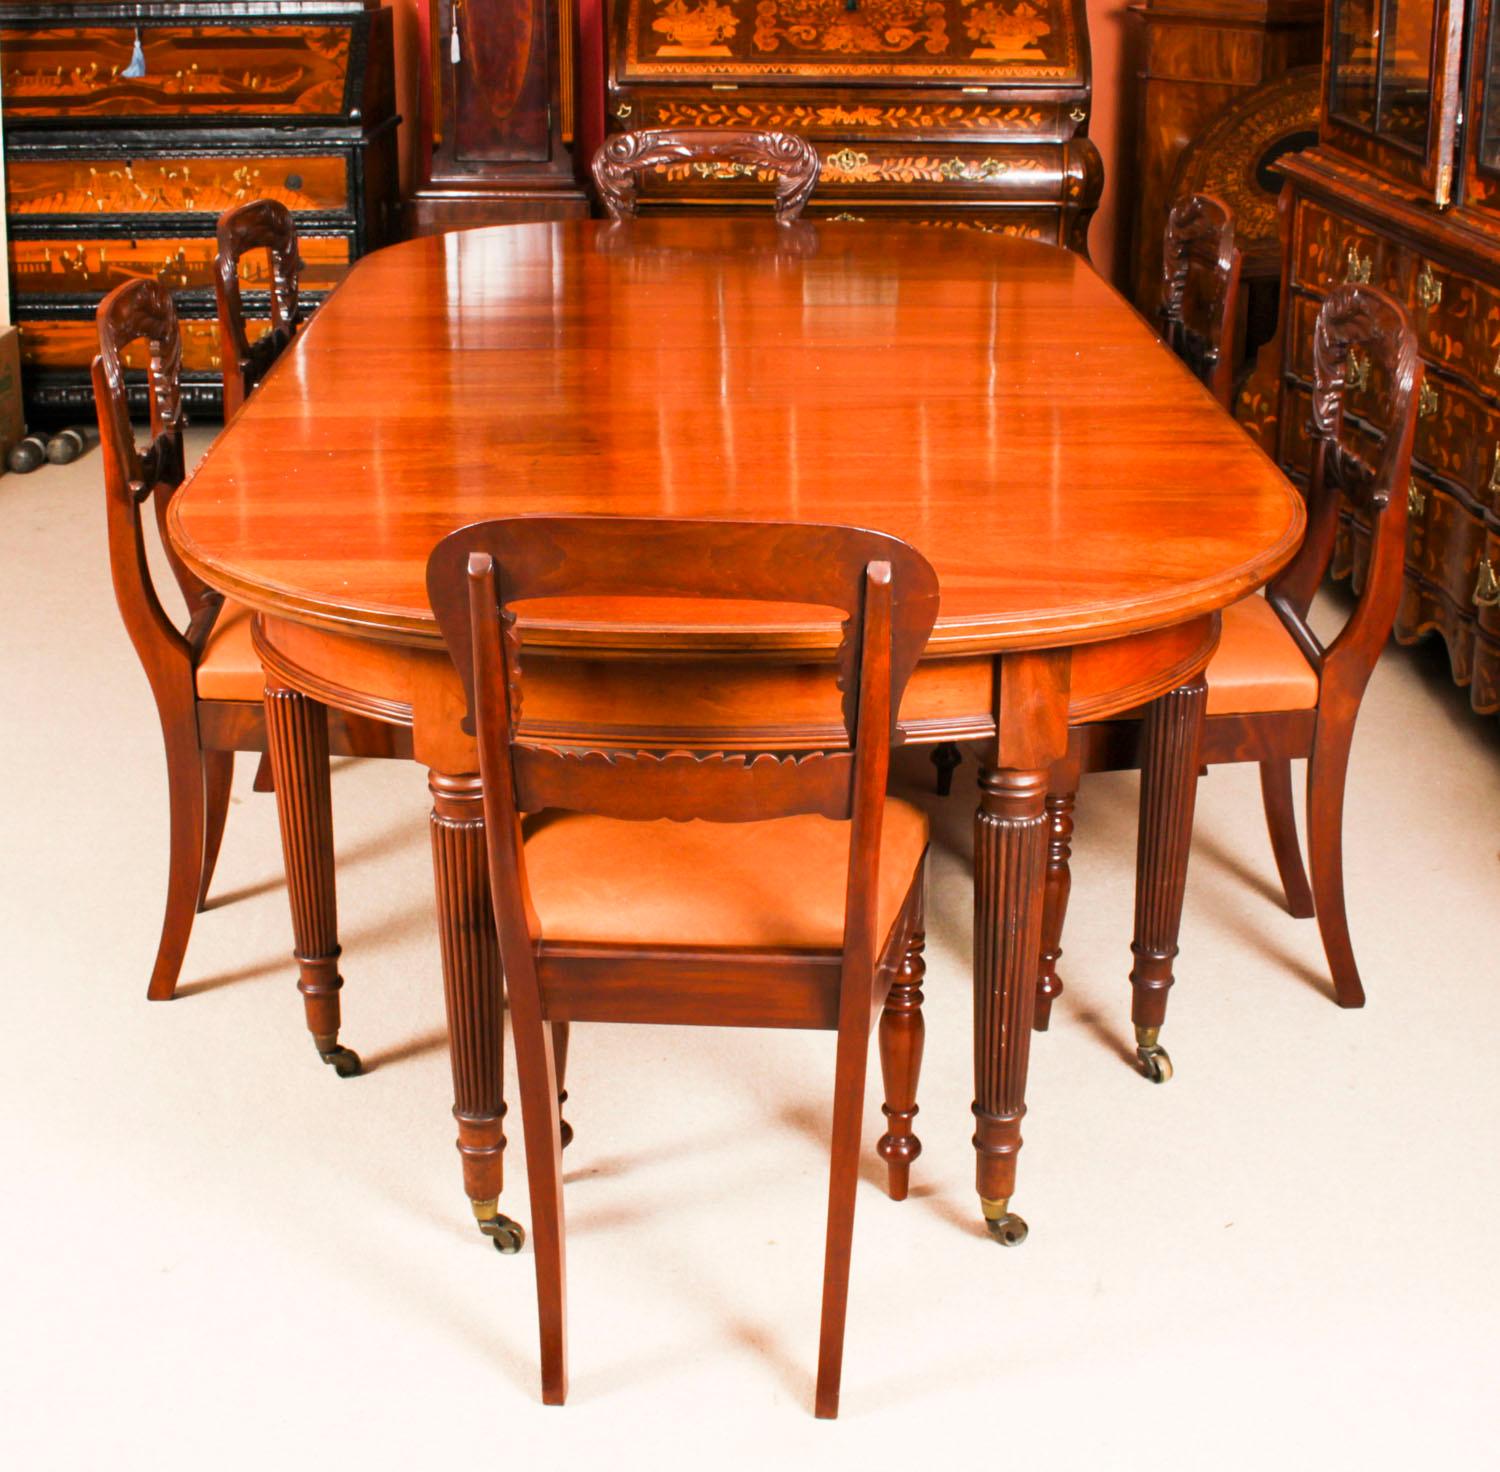 Late 19th Century Antique Victorian Flame Mahogany Oval Extending Dining Table, 19th Century